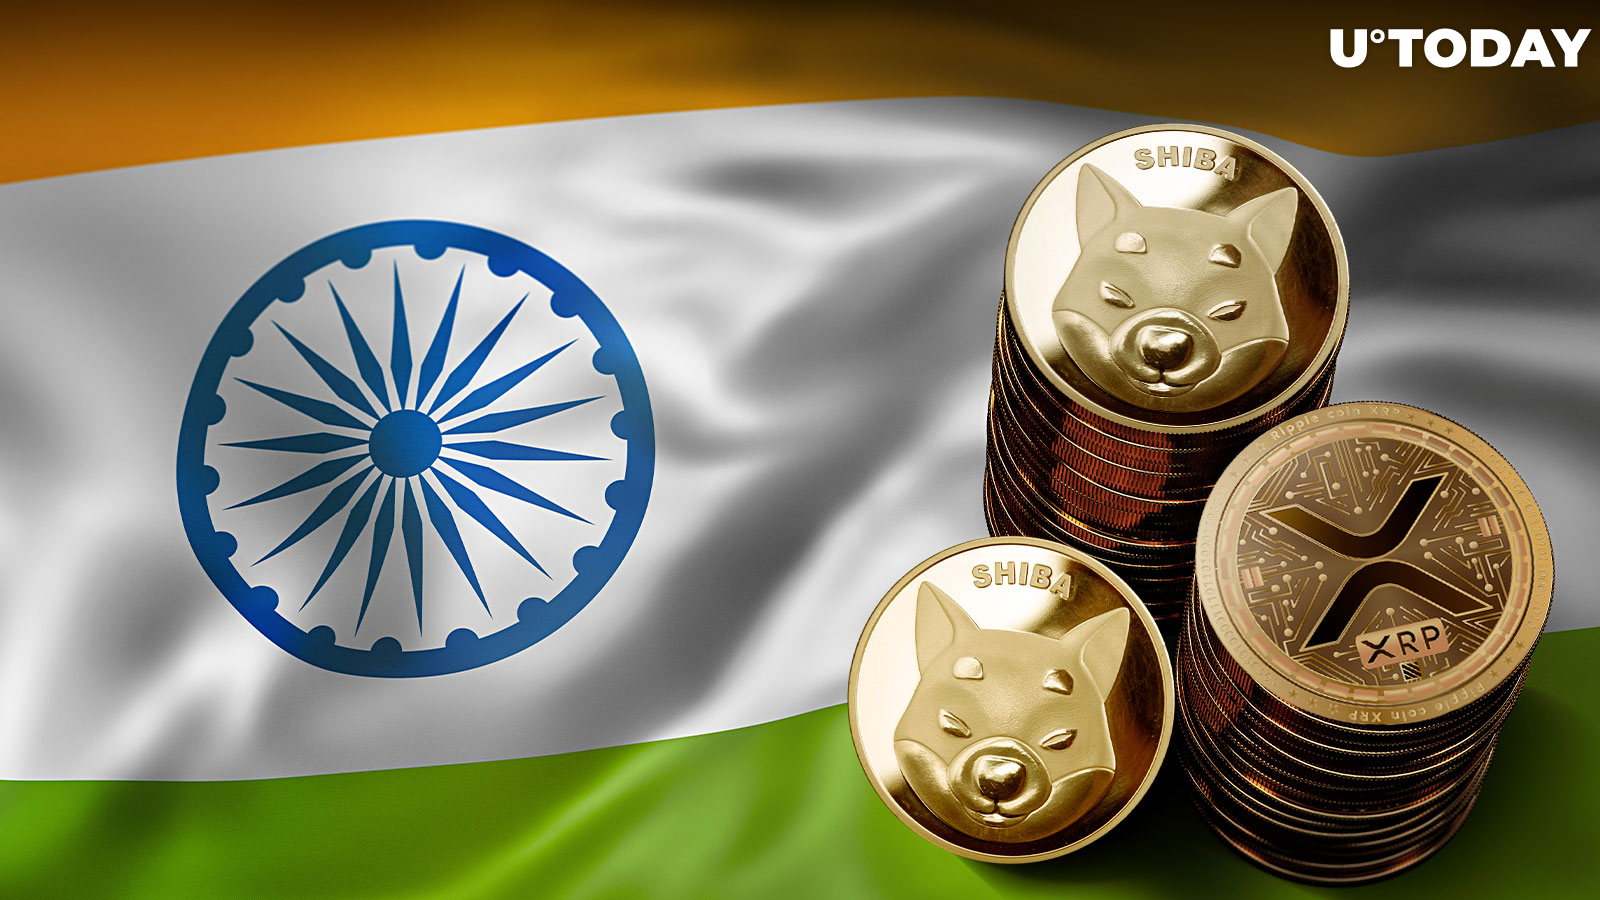 XRP and Shiba Inu Dominate Trading on Leading Indian Crypto Platform